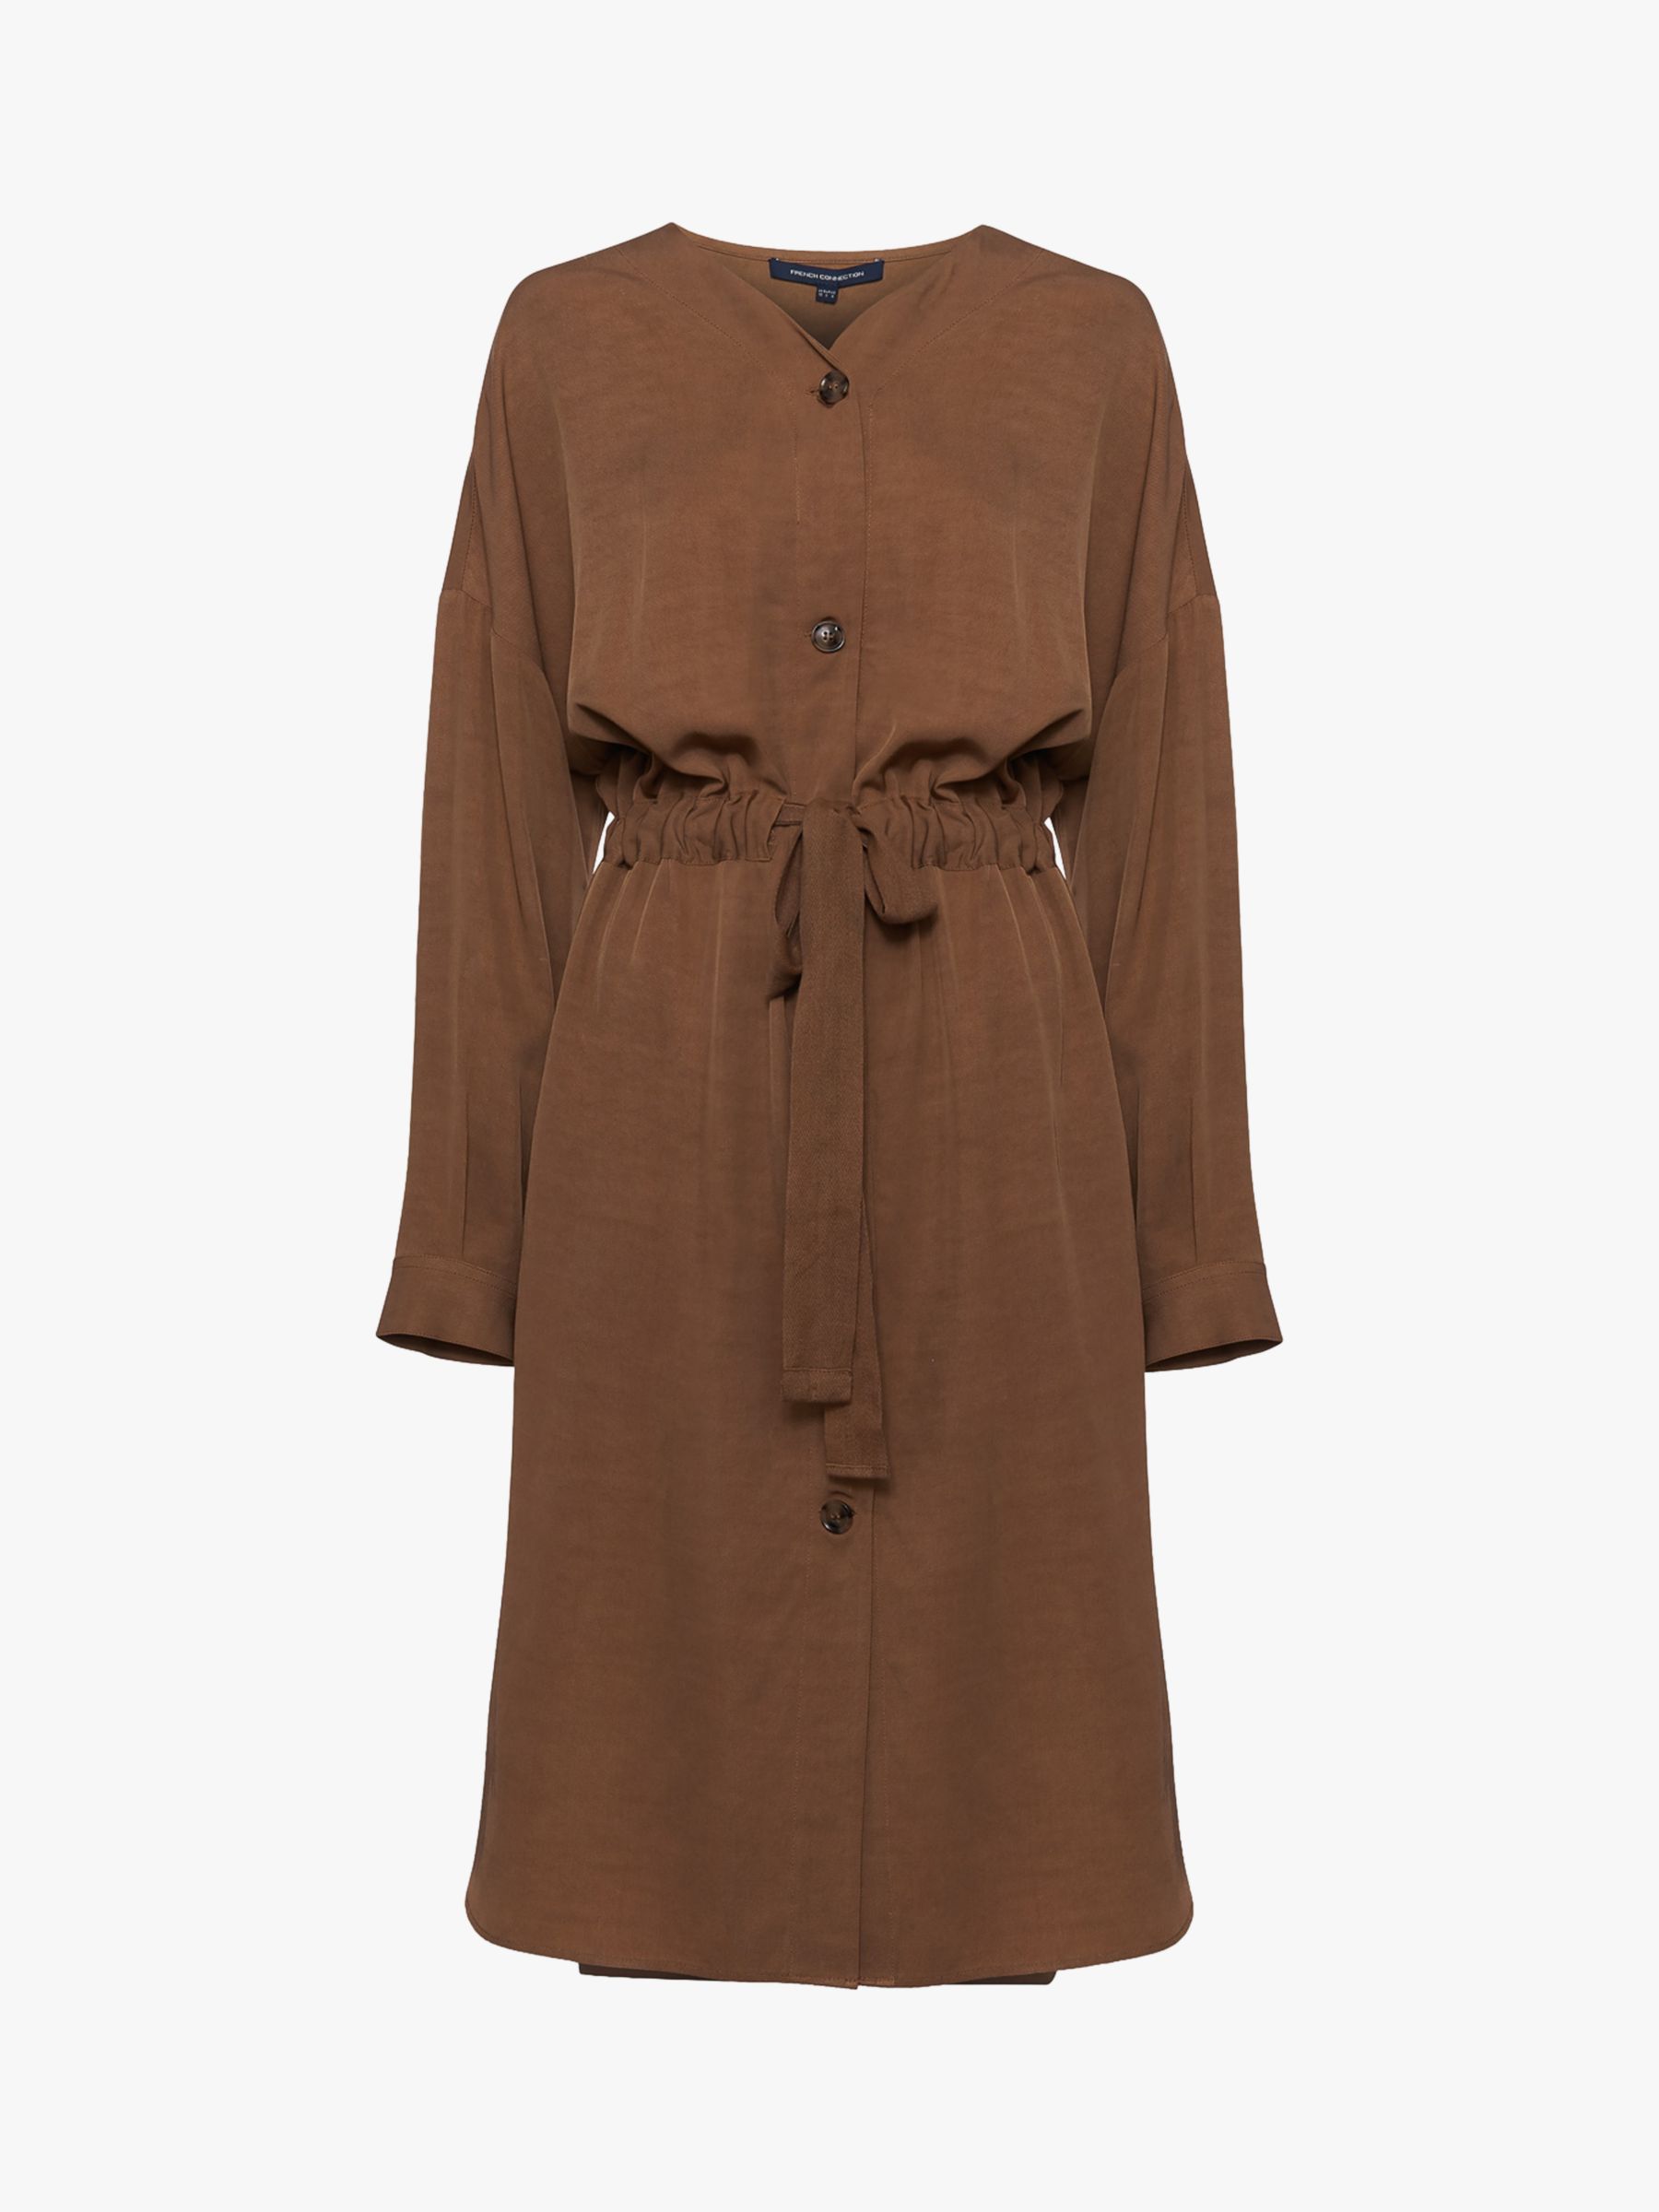 French Connection Baina Twill Belted Midi Dress, Warm Sand, S